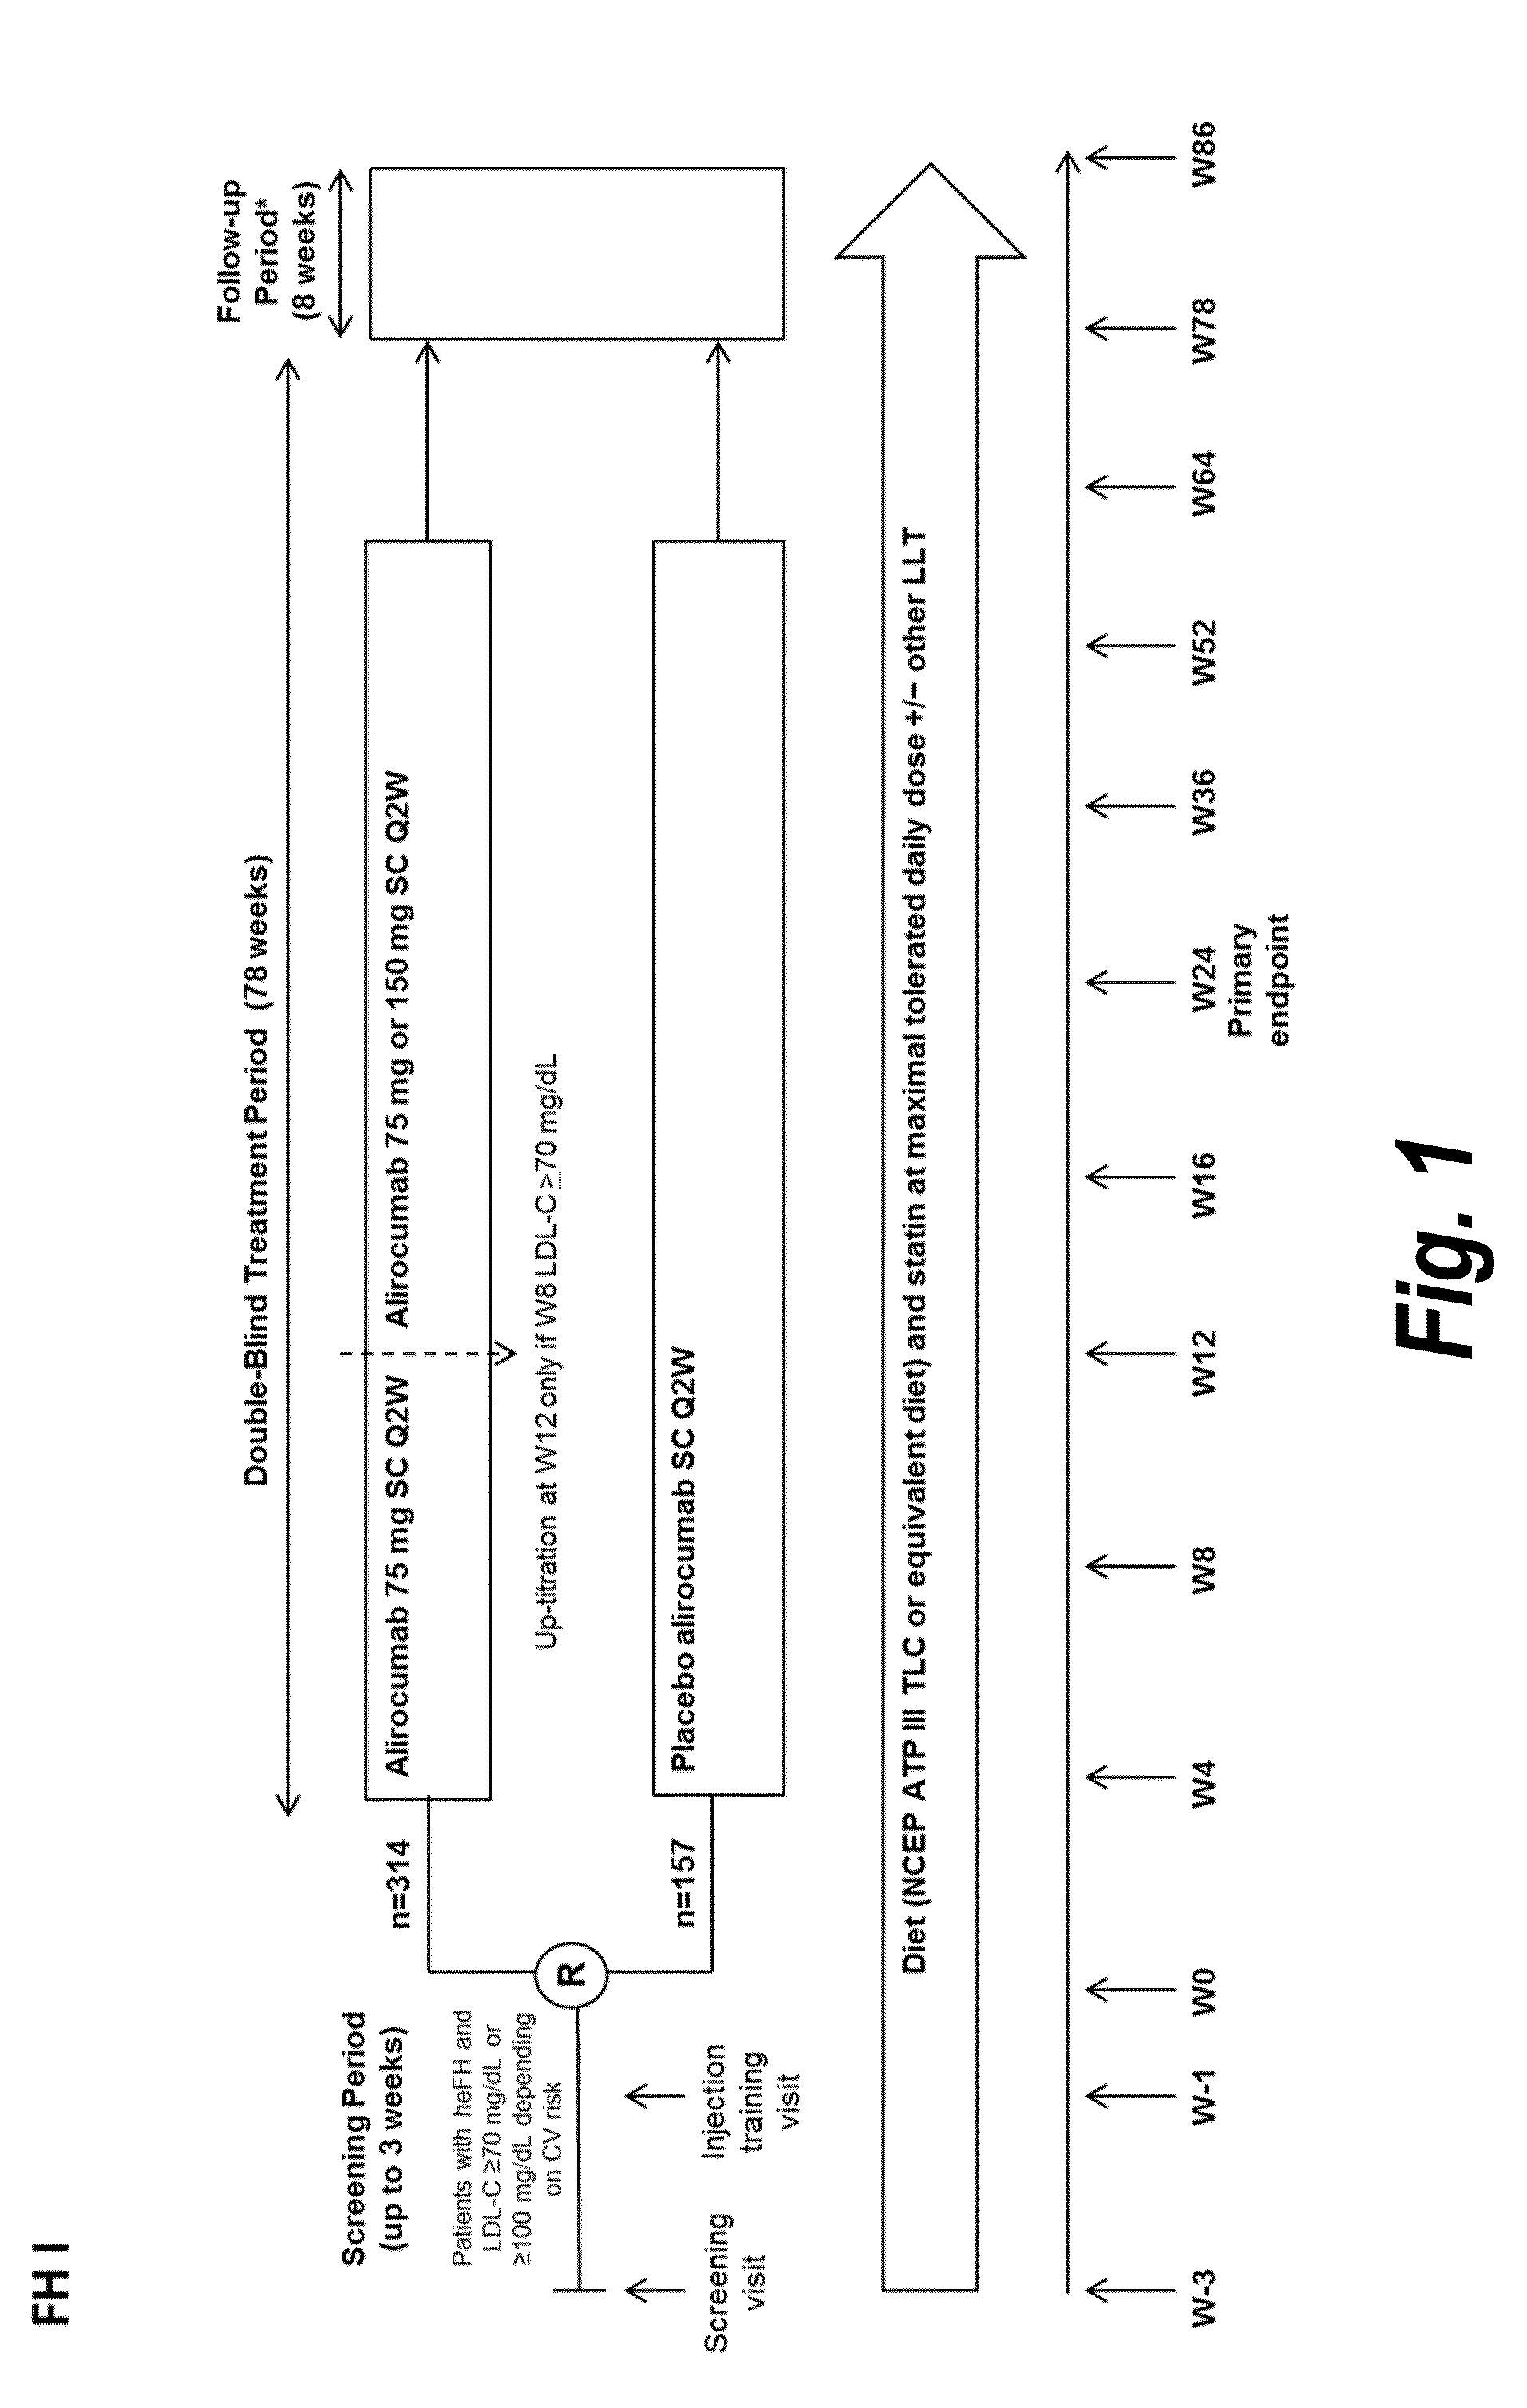 METHODS FOR TREATING PATIENTS WITH HETEROZYGOUS FAMILIAL HYPERCHOLESTEROLEMIA (heFH)